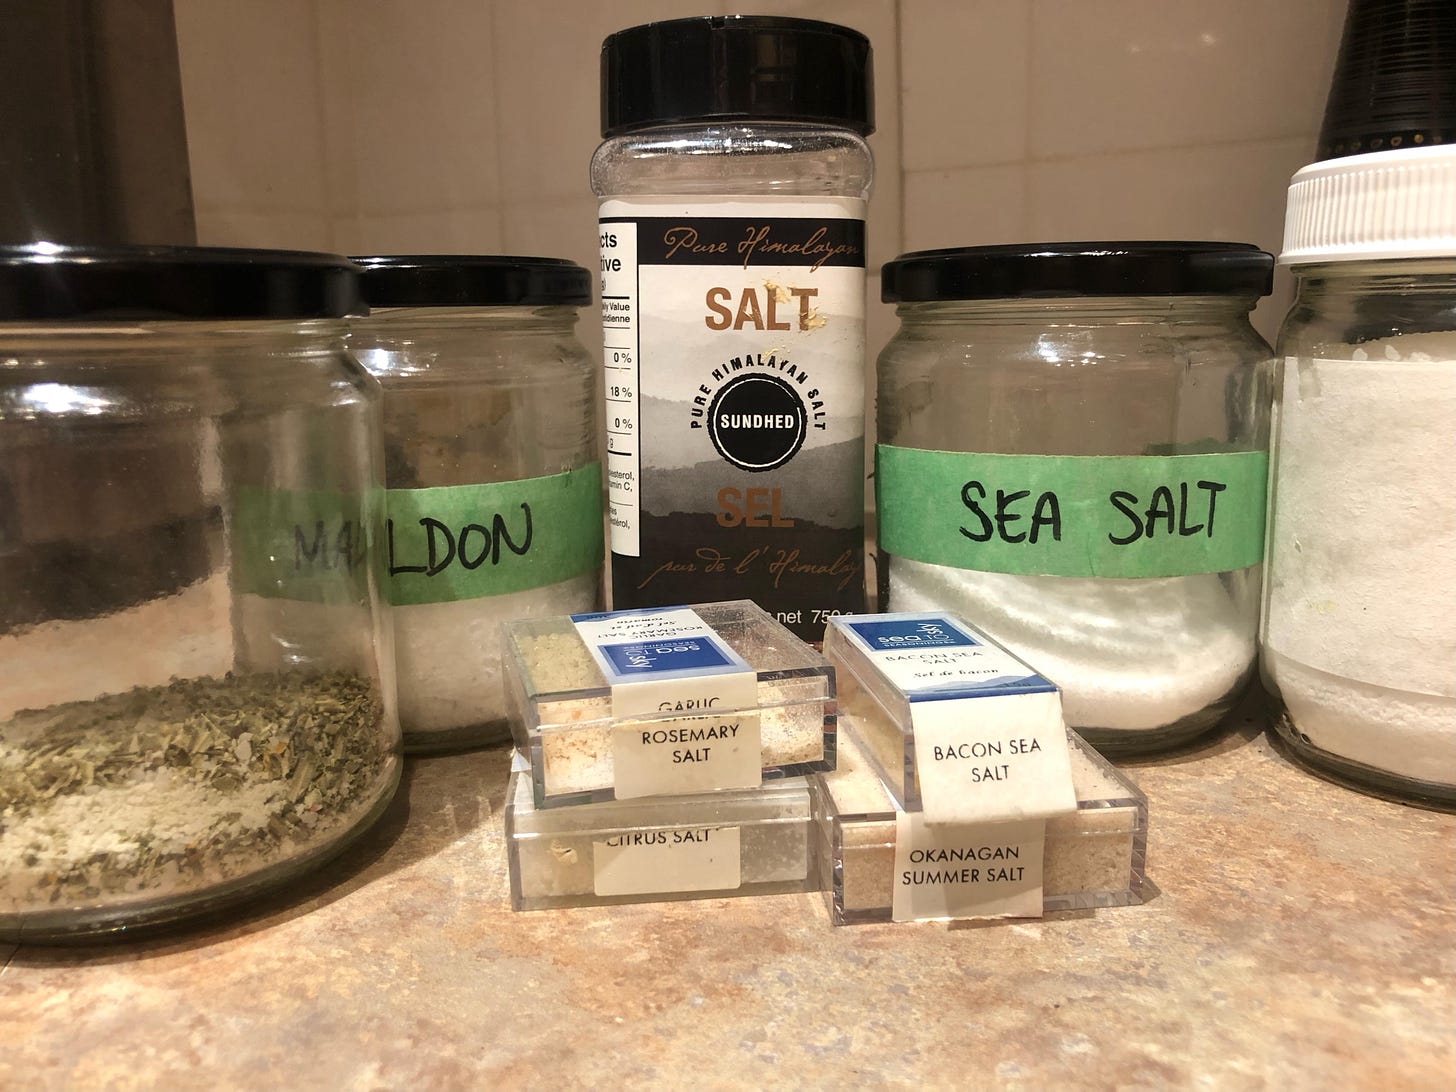 A photo showing a few different kinds of salt